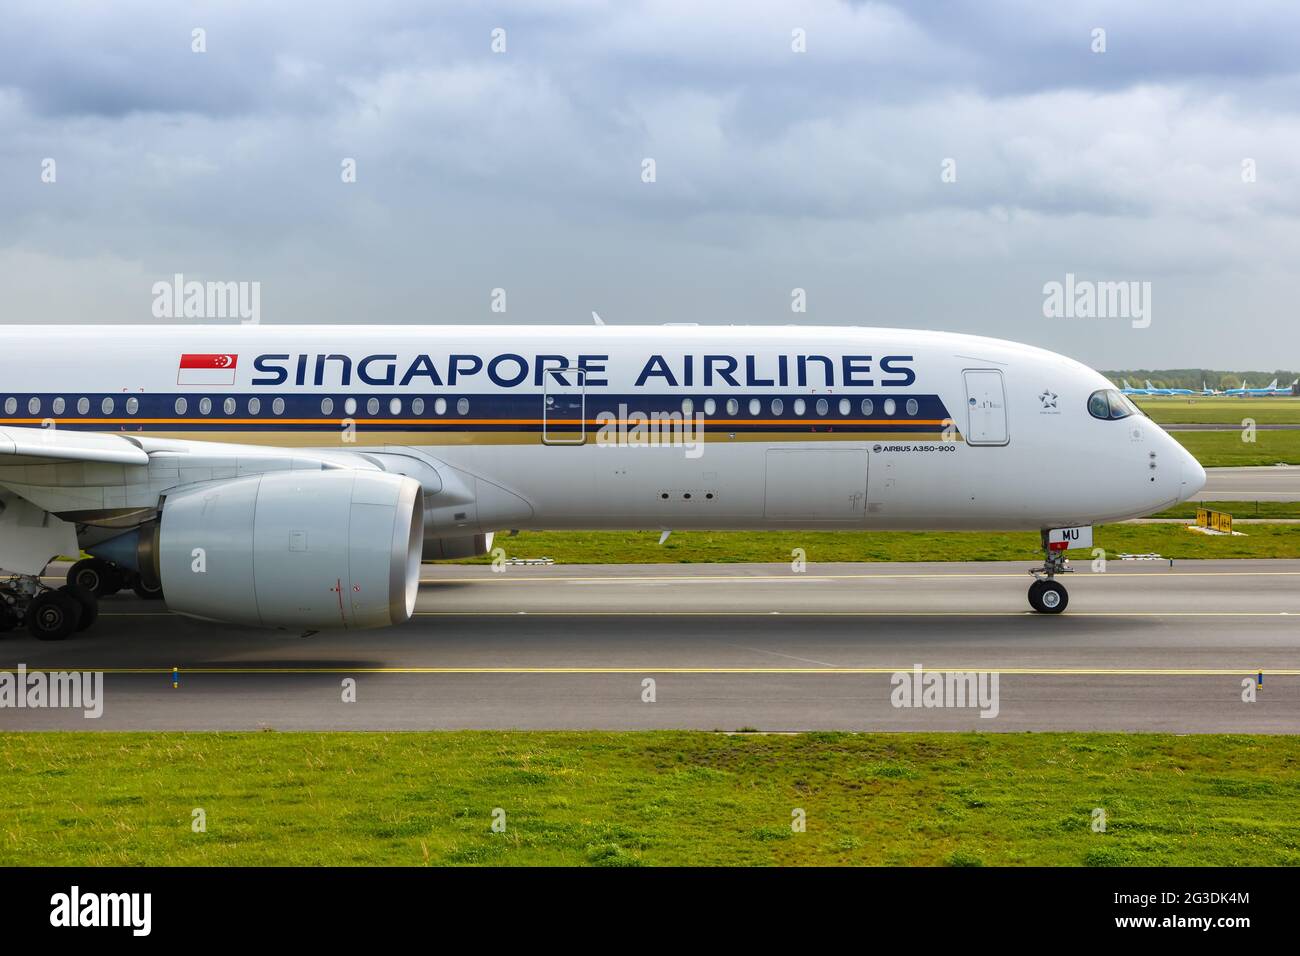 Amsterdam, Netherlands - May 21, 2021: Singapore Airlines Airbus A350-900 airplane at Amsterdam Schiphol airport (AMS) in the Netherlands. Stock Photo